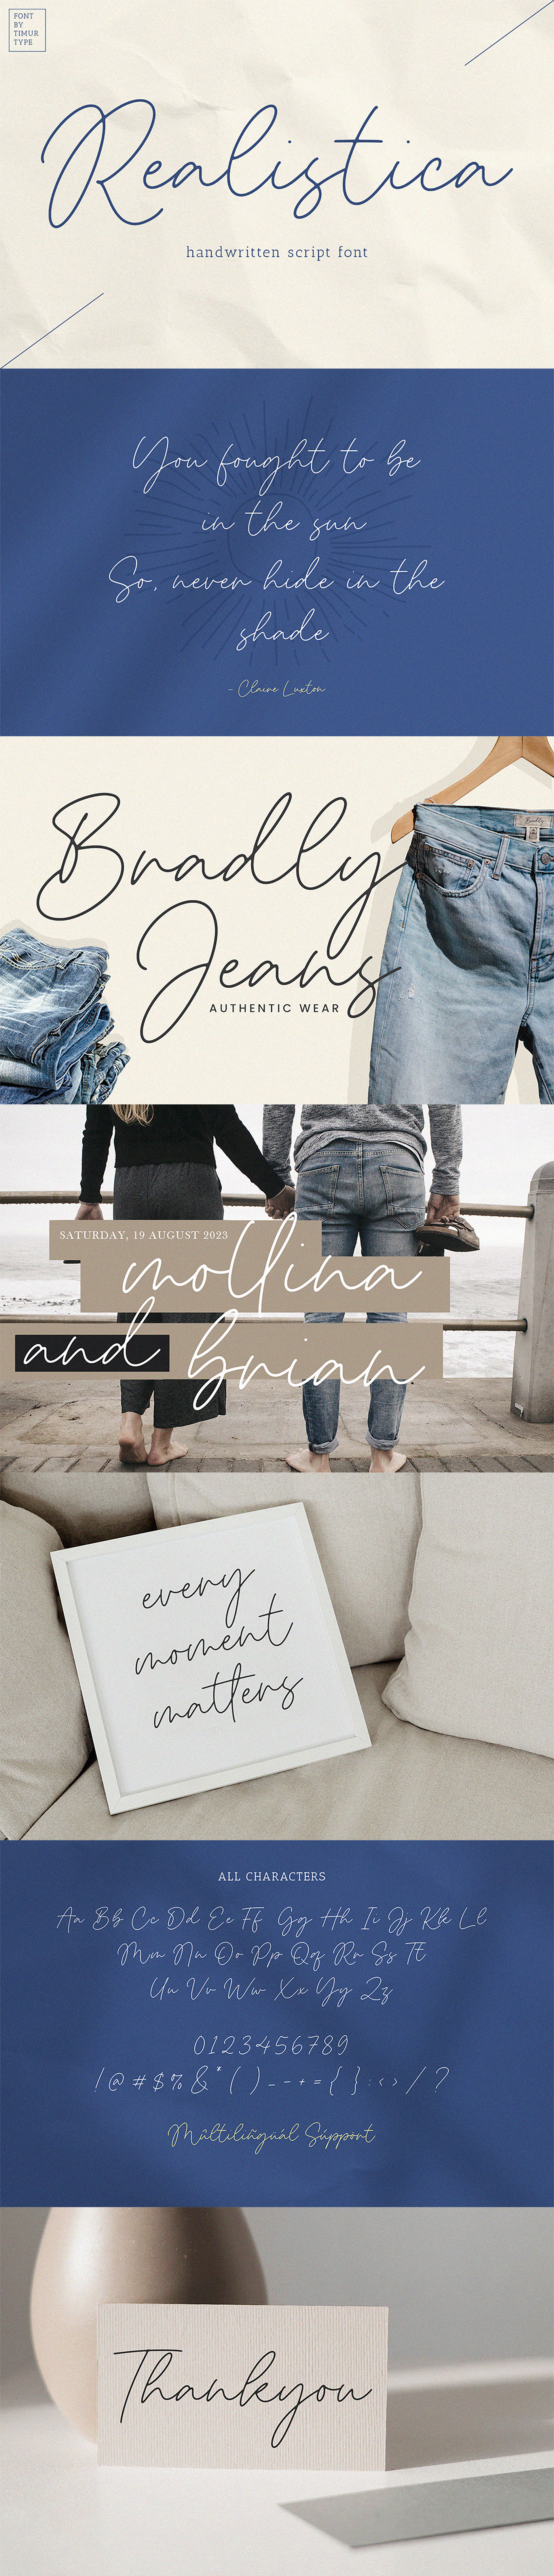 It  is a lovely, fresh and flowing handwritten font that will bring a warm and inviting feel to you.